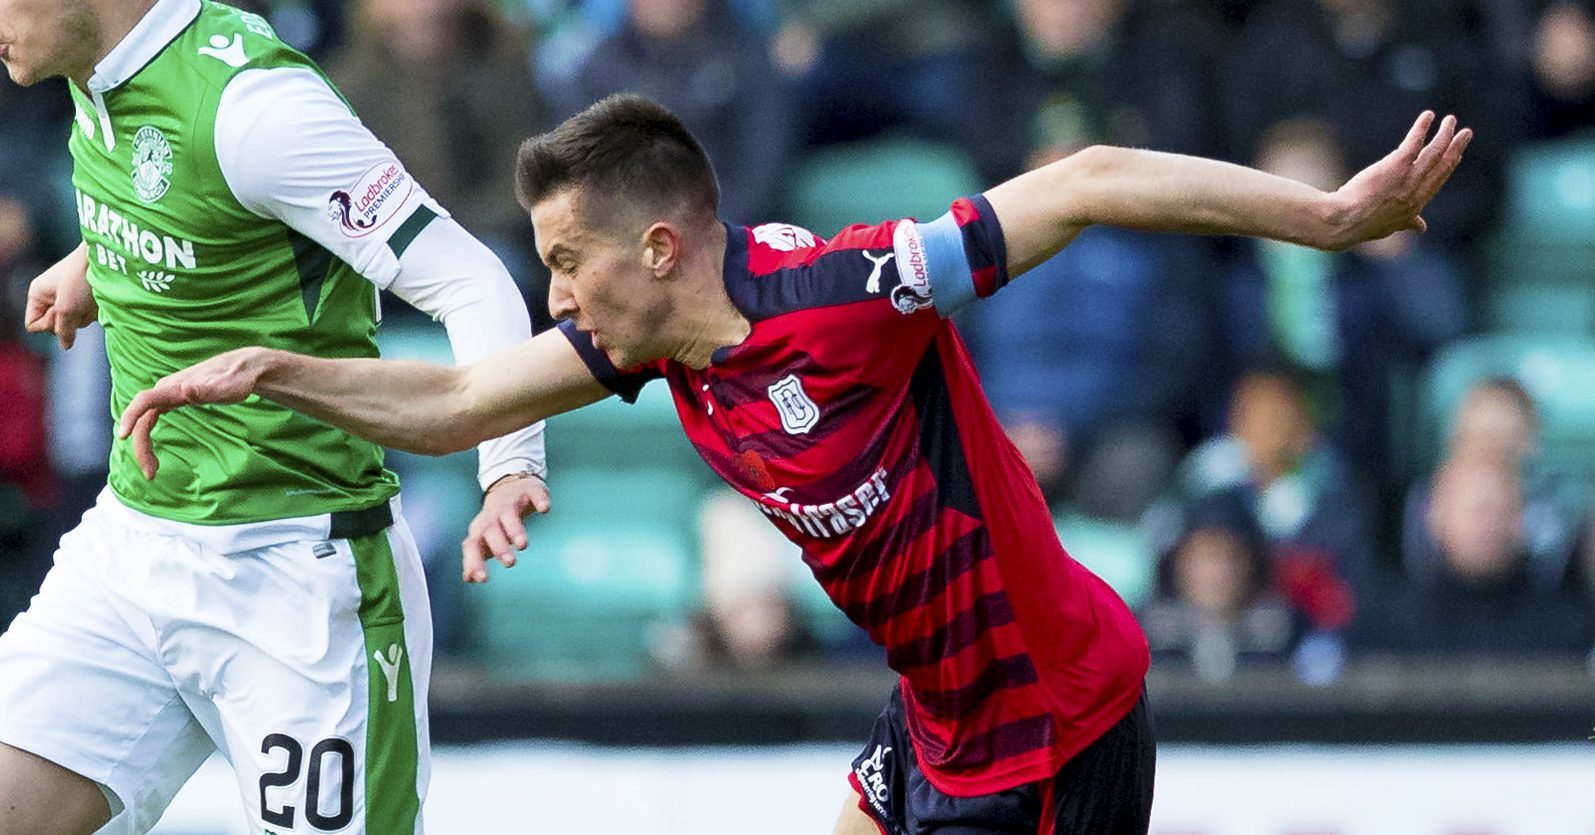 Dundee's Cammy Kerr in action against Hibs.